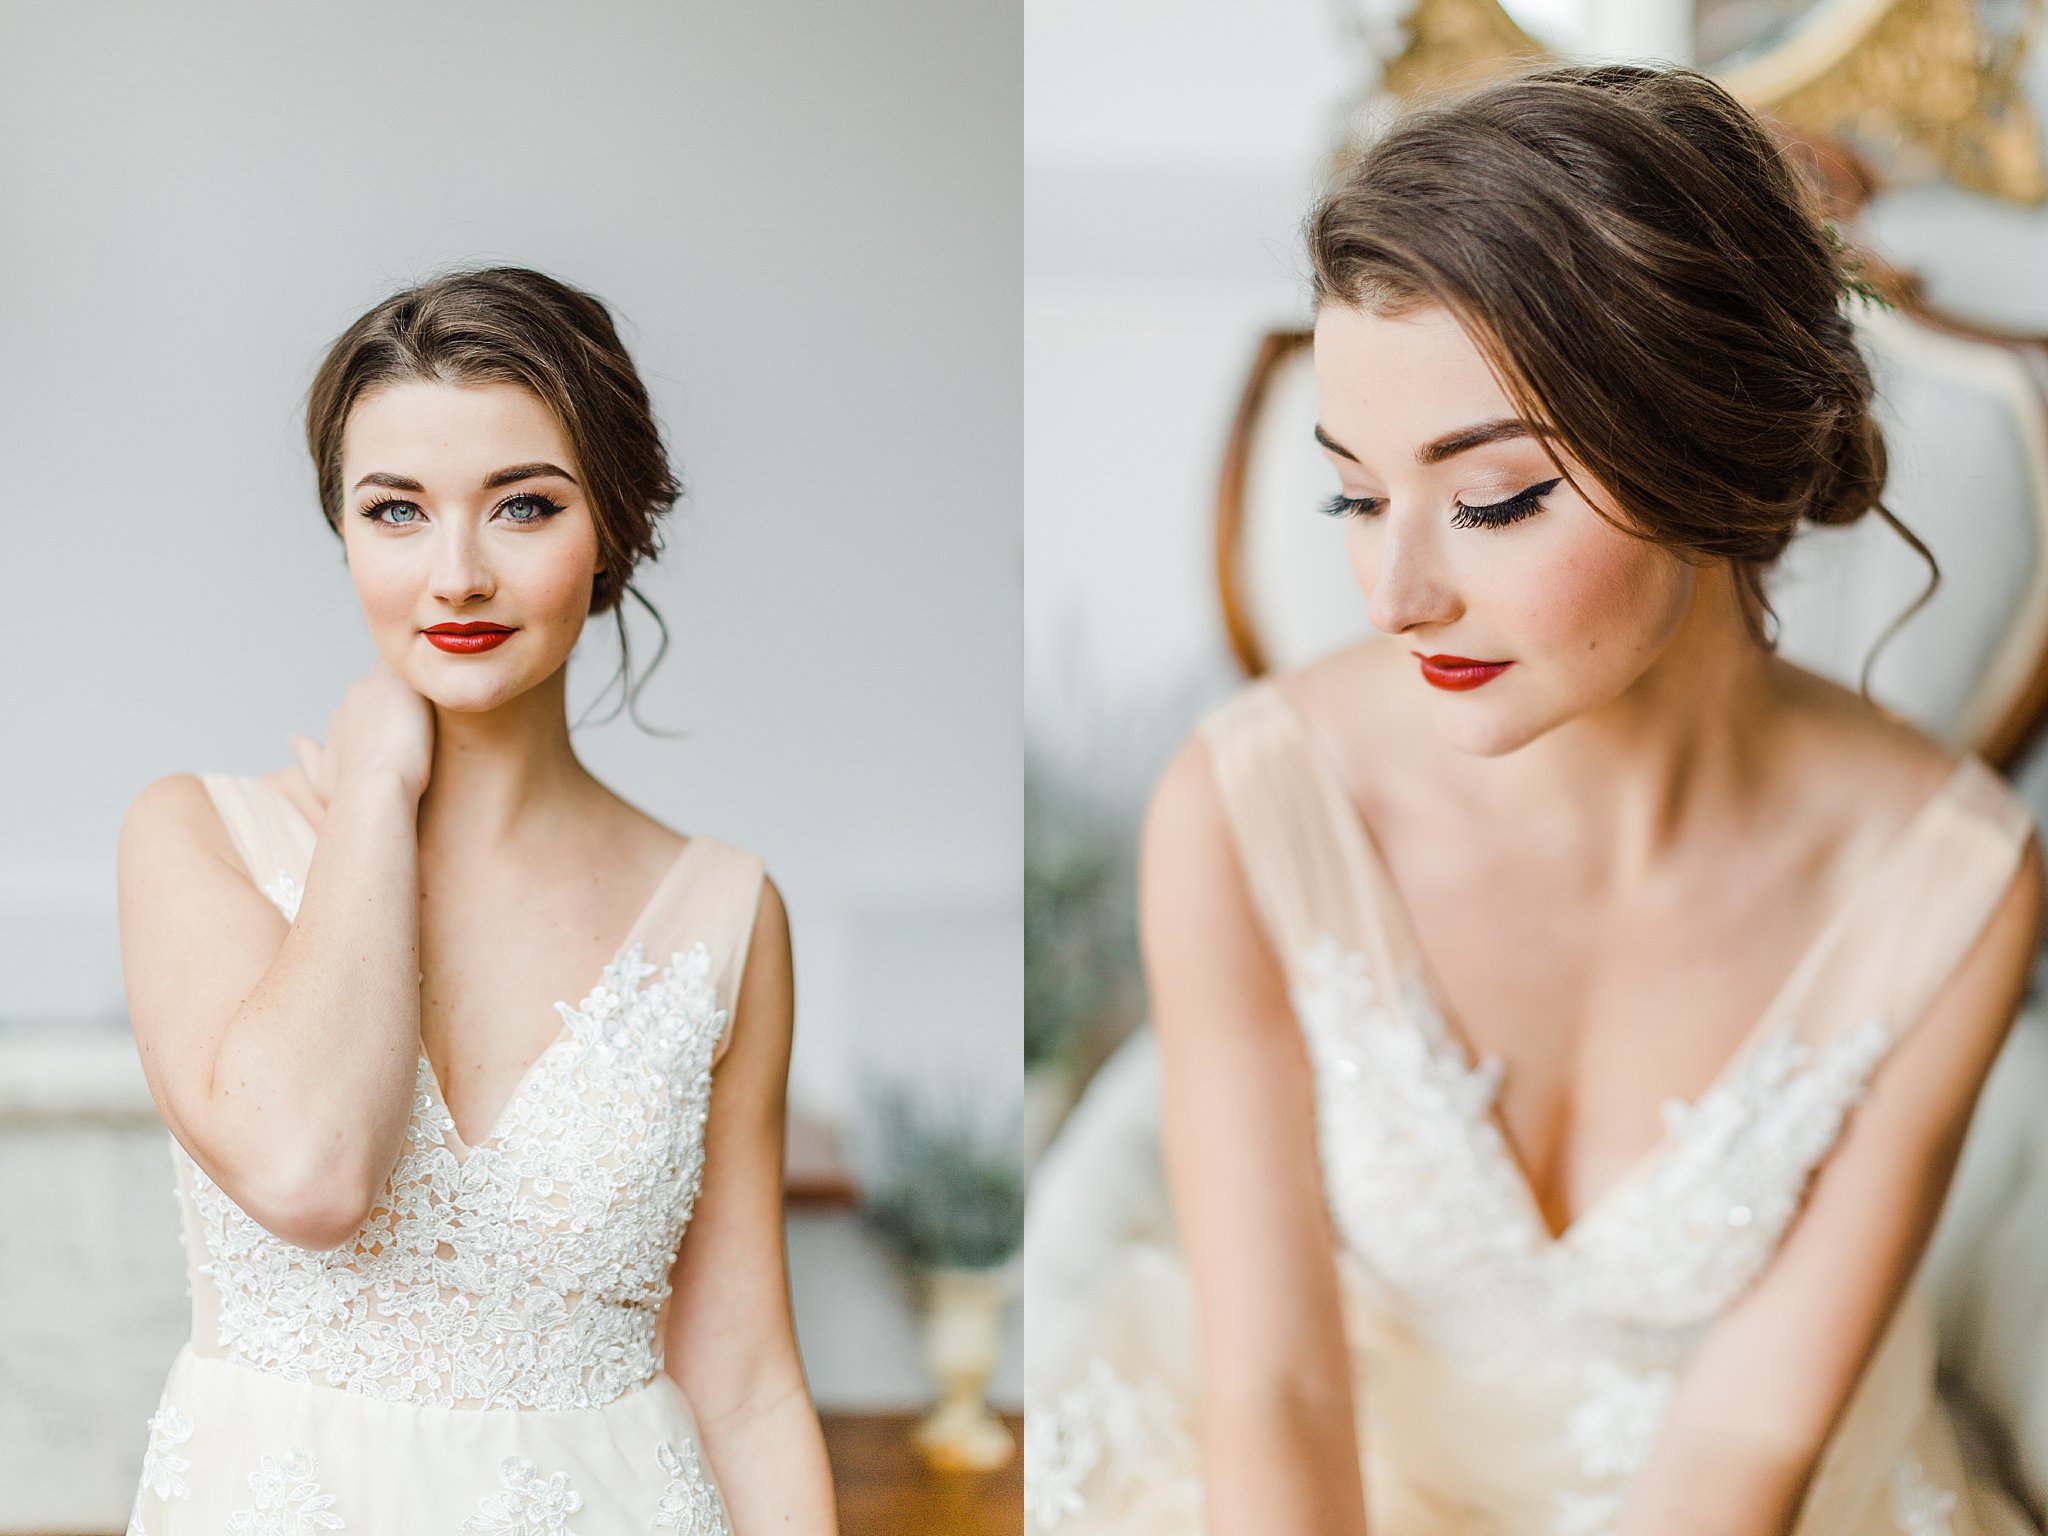 Bridal portraits for an article showing 3 questions to ask when choosing a wedding photographer